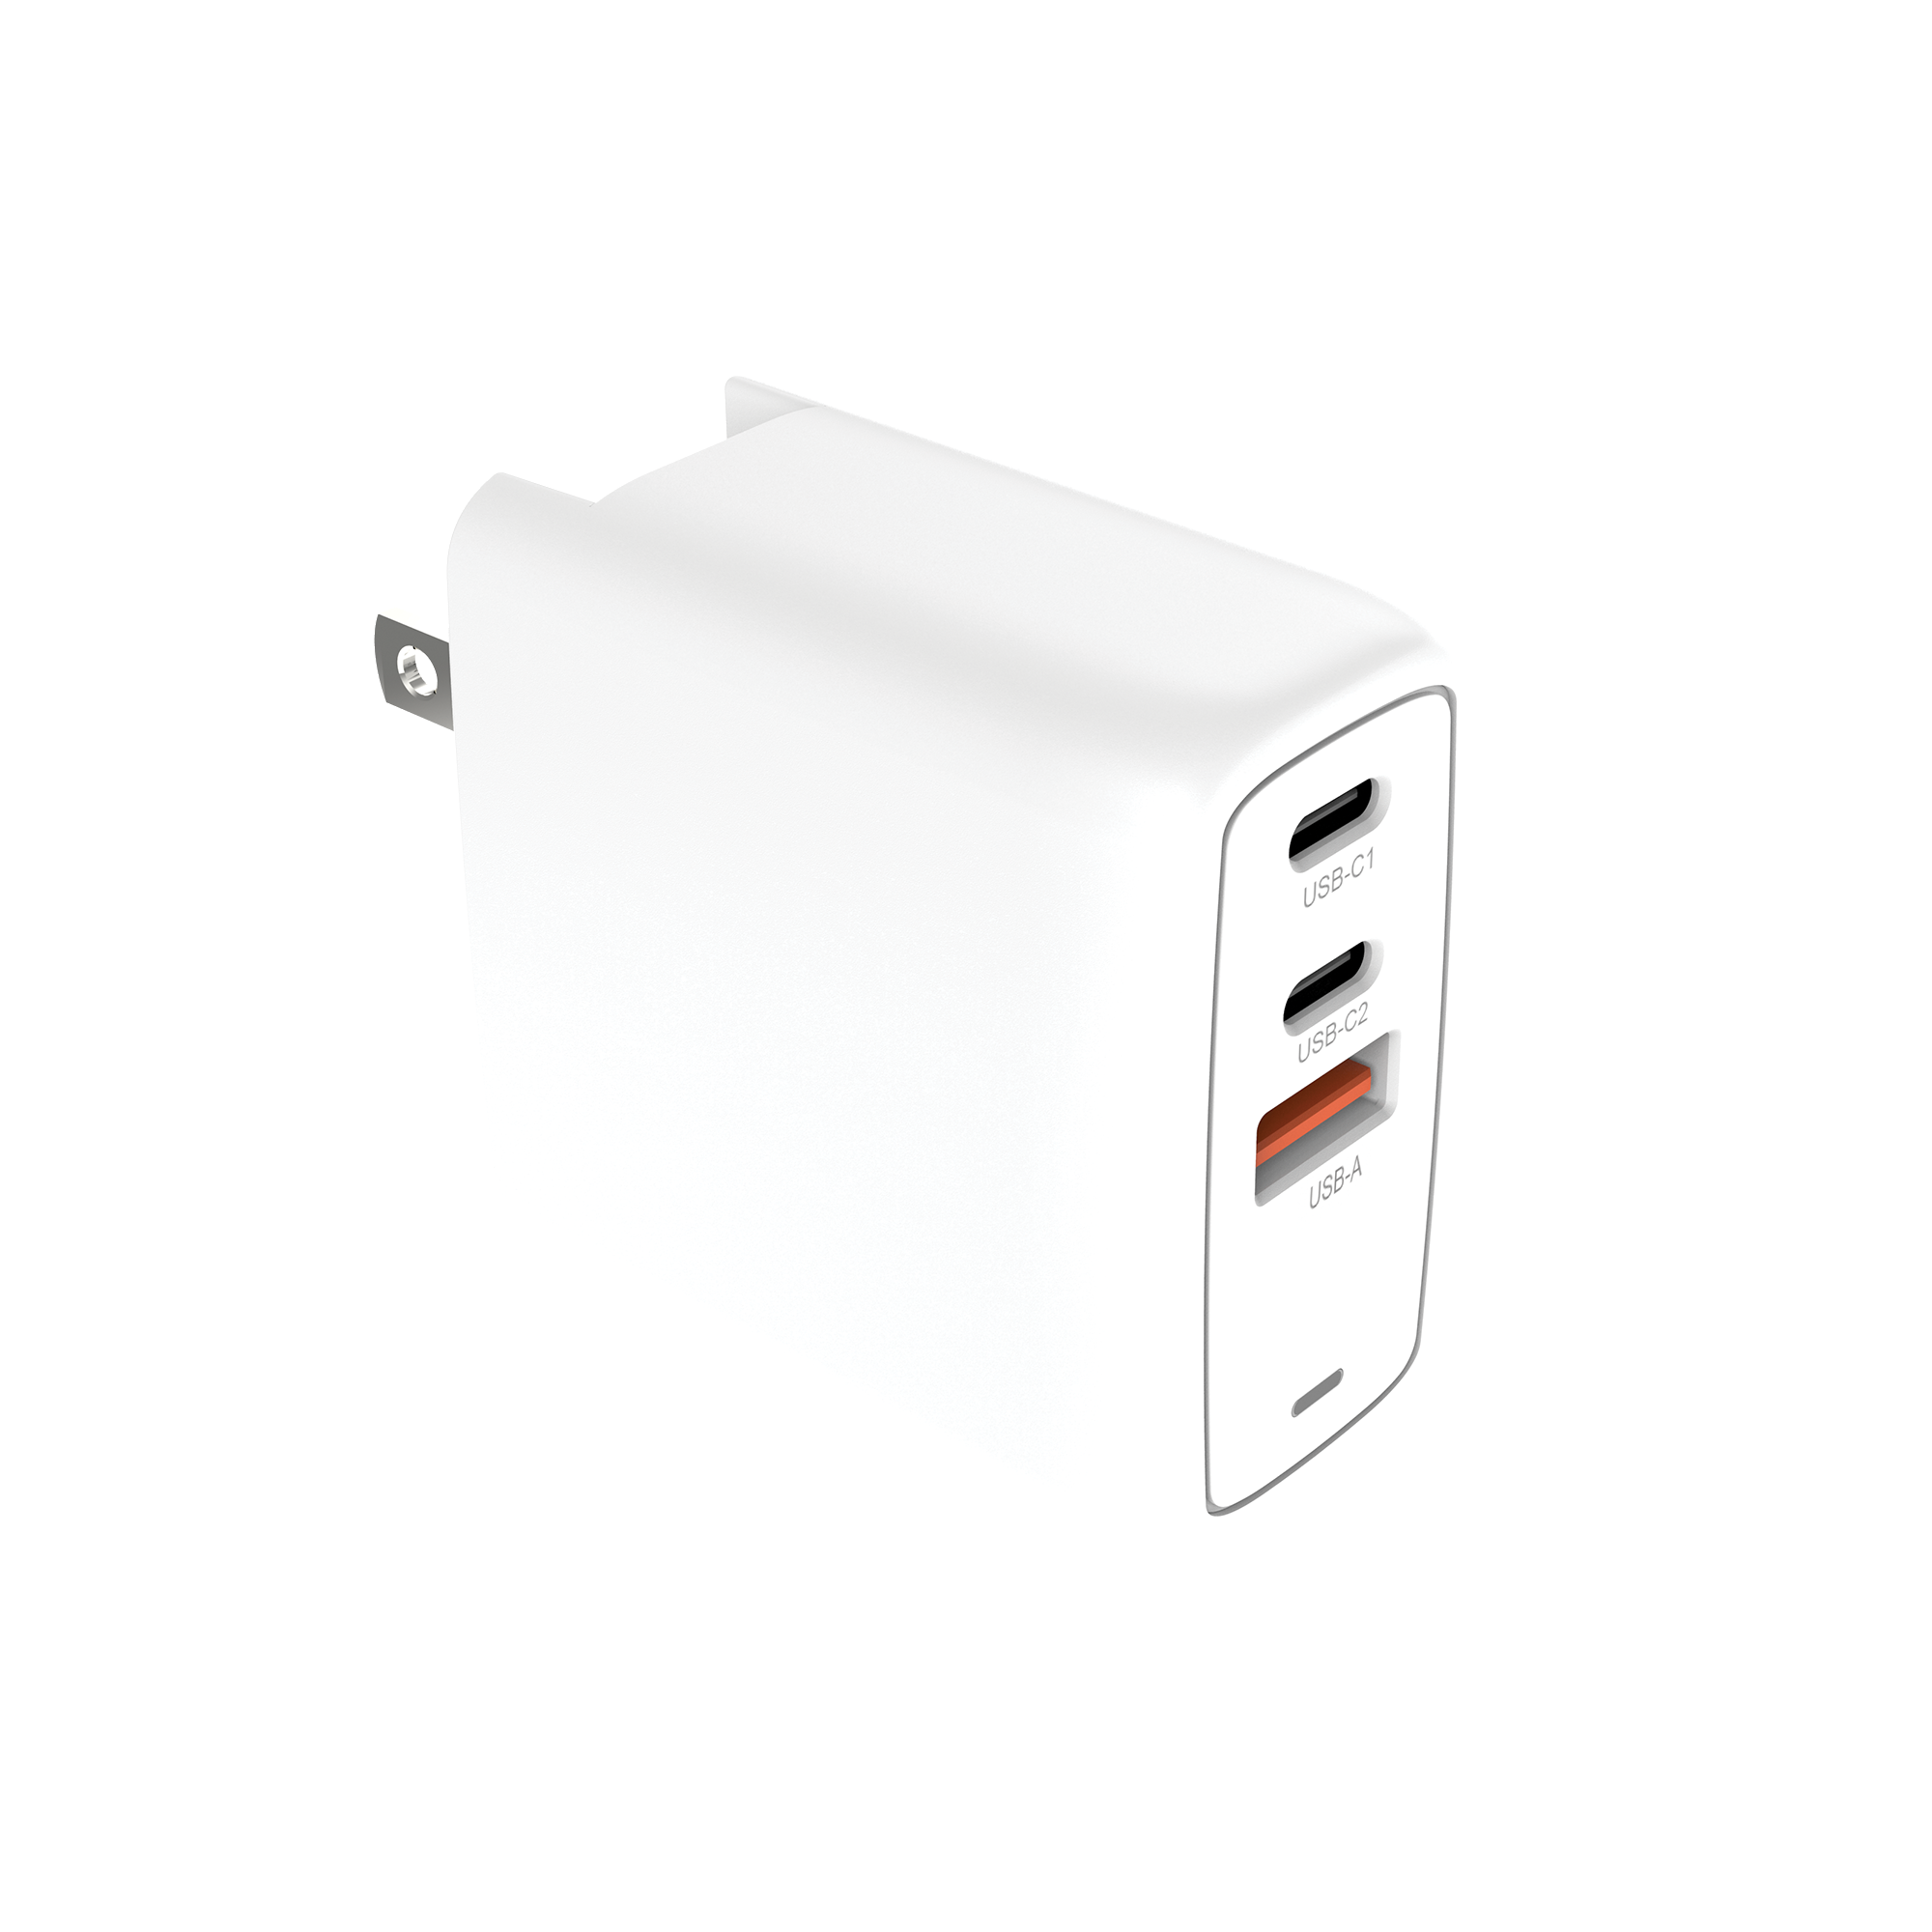 What are GaN chargers?